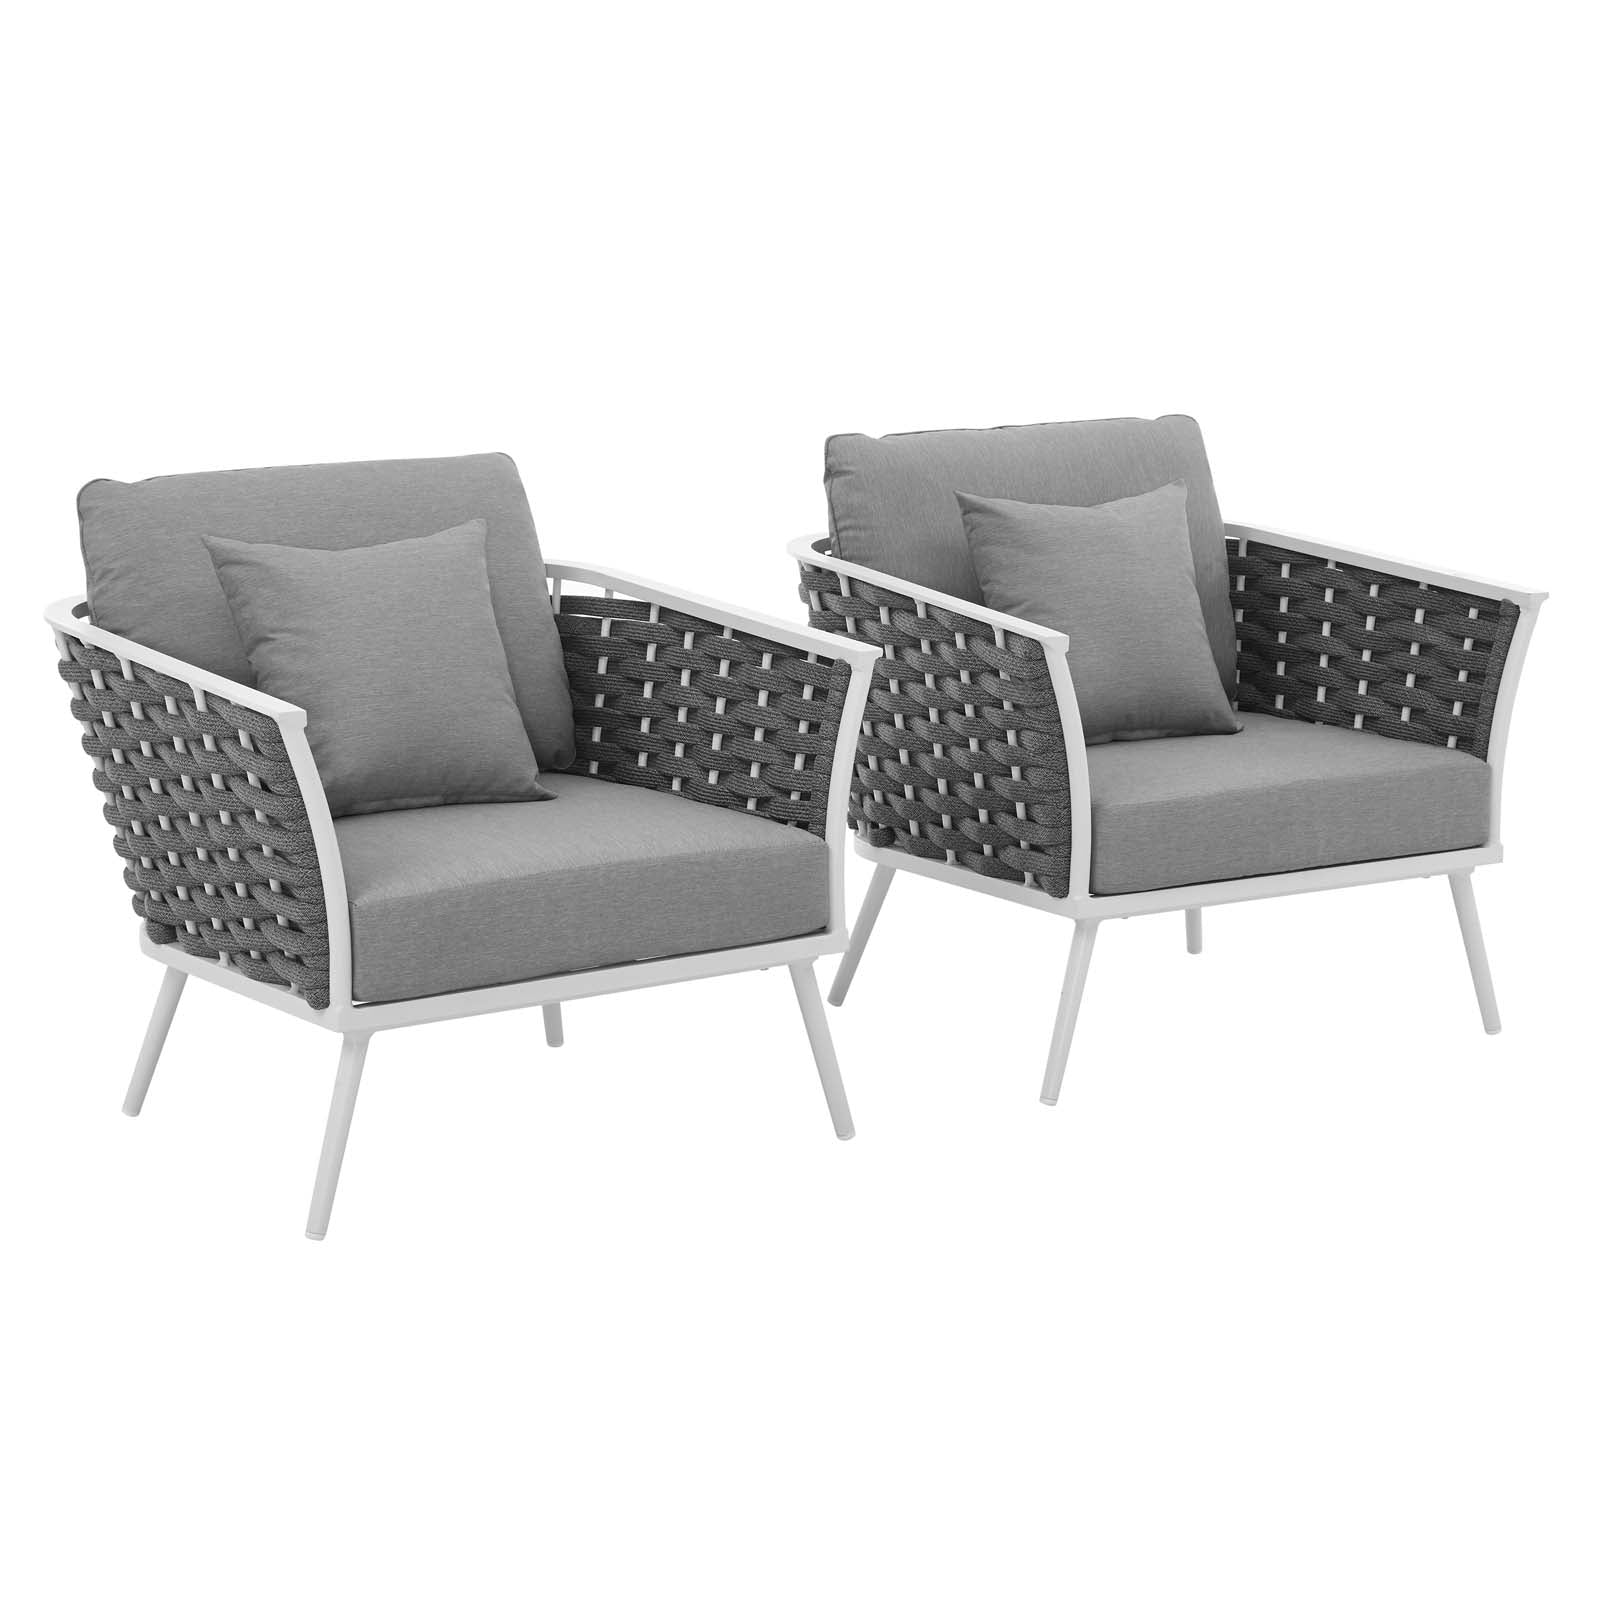 Stance Outdoor Armchair White & Gray (Set Of 2)